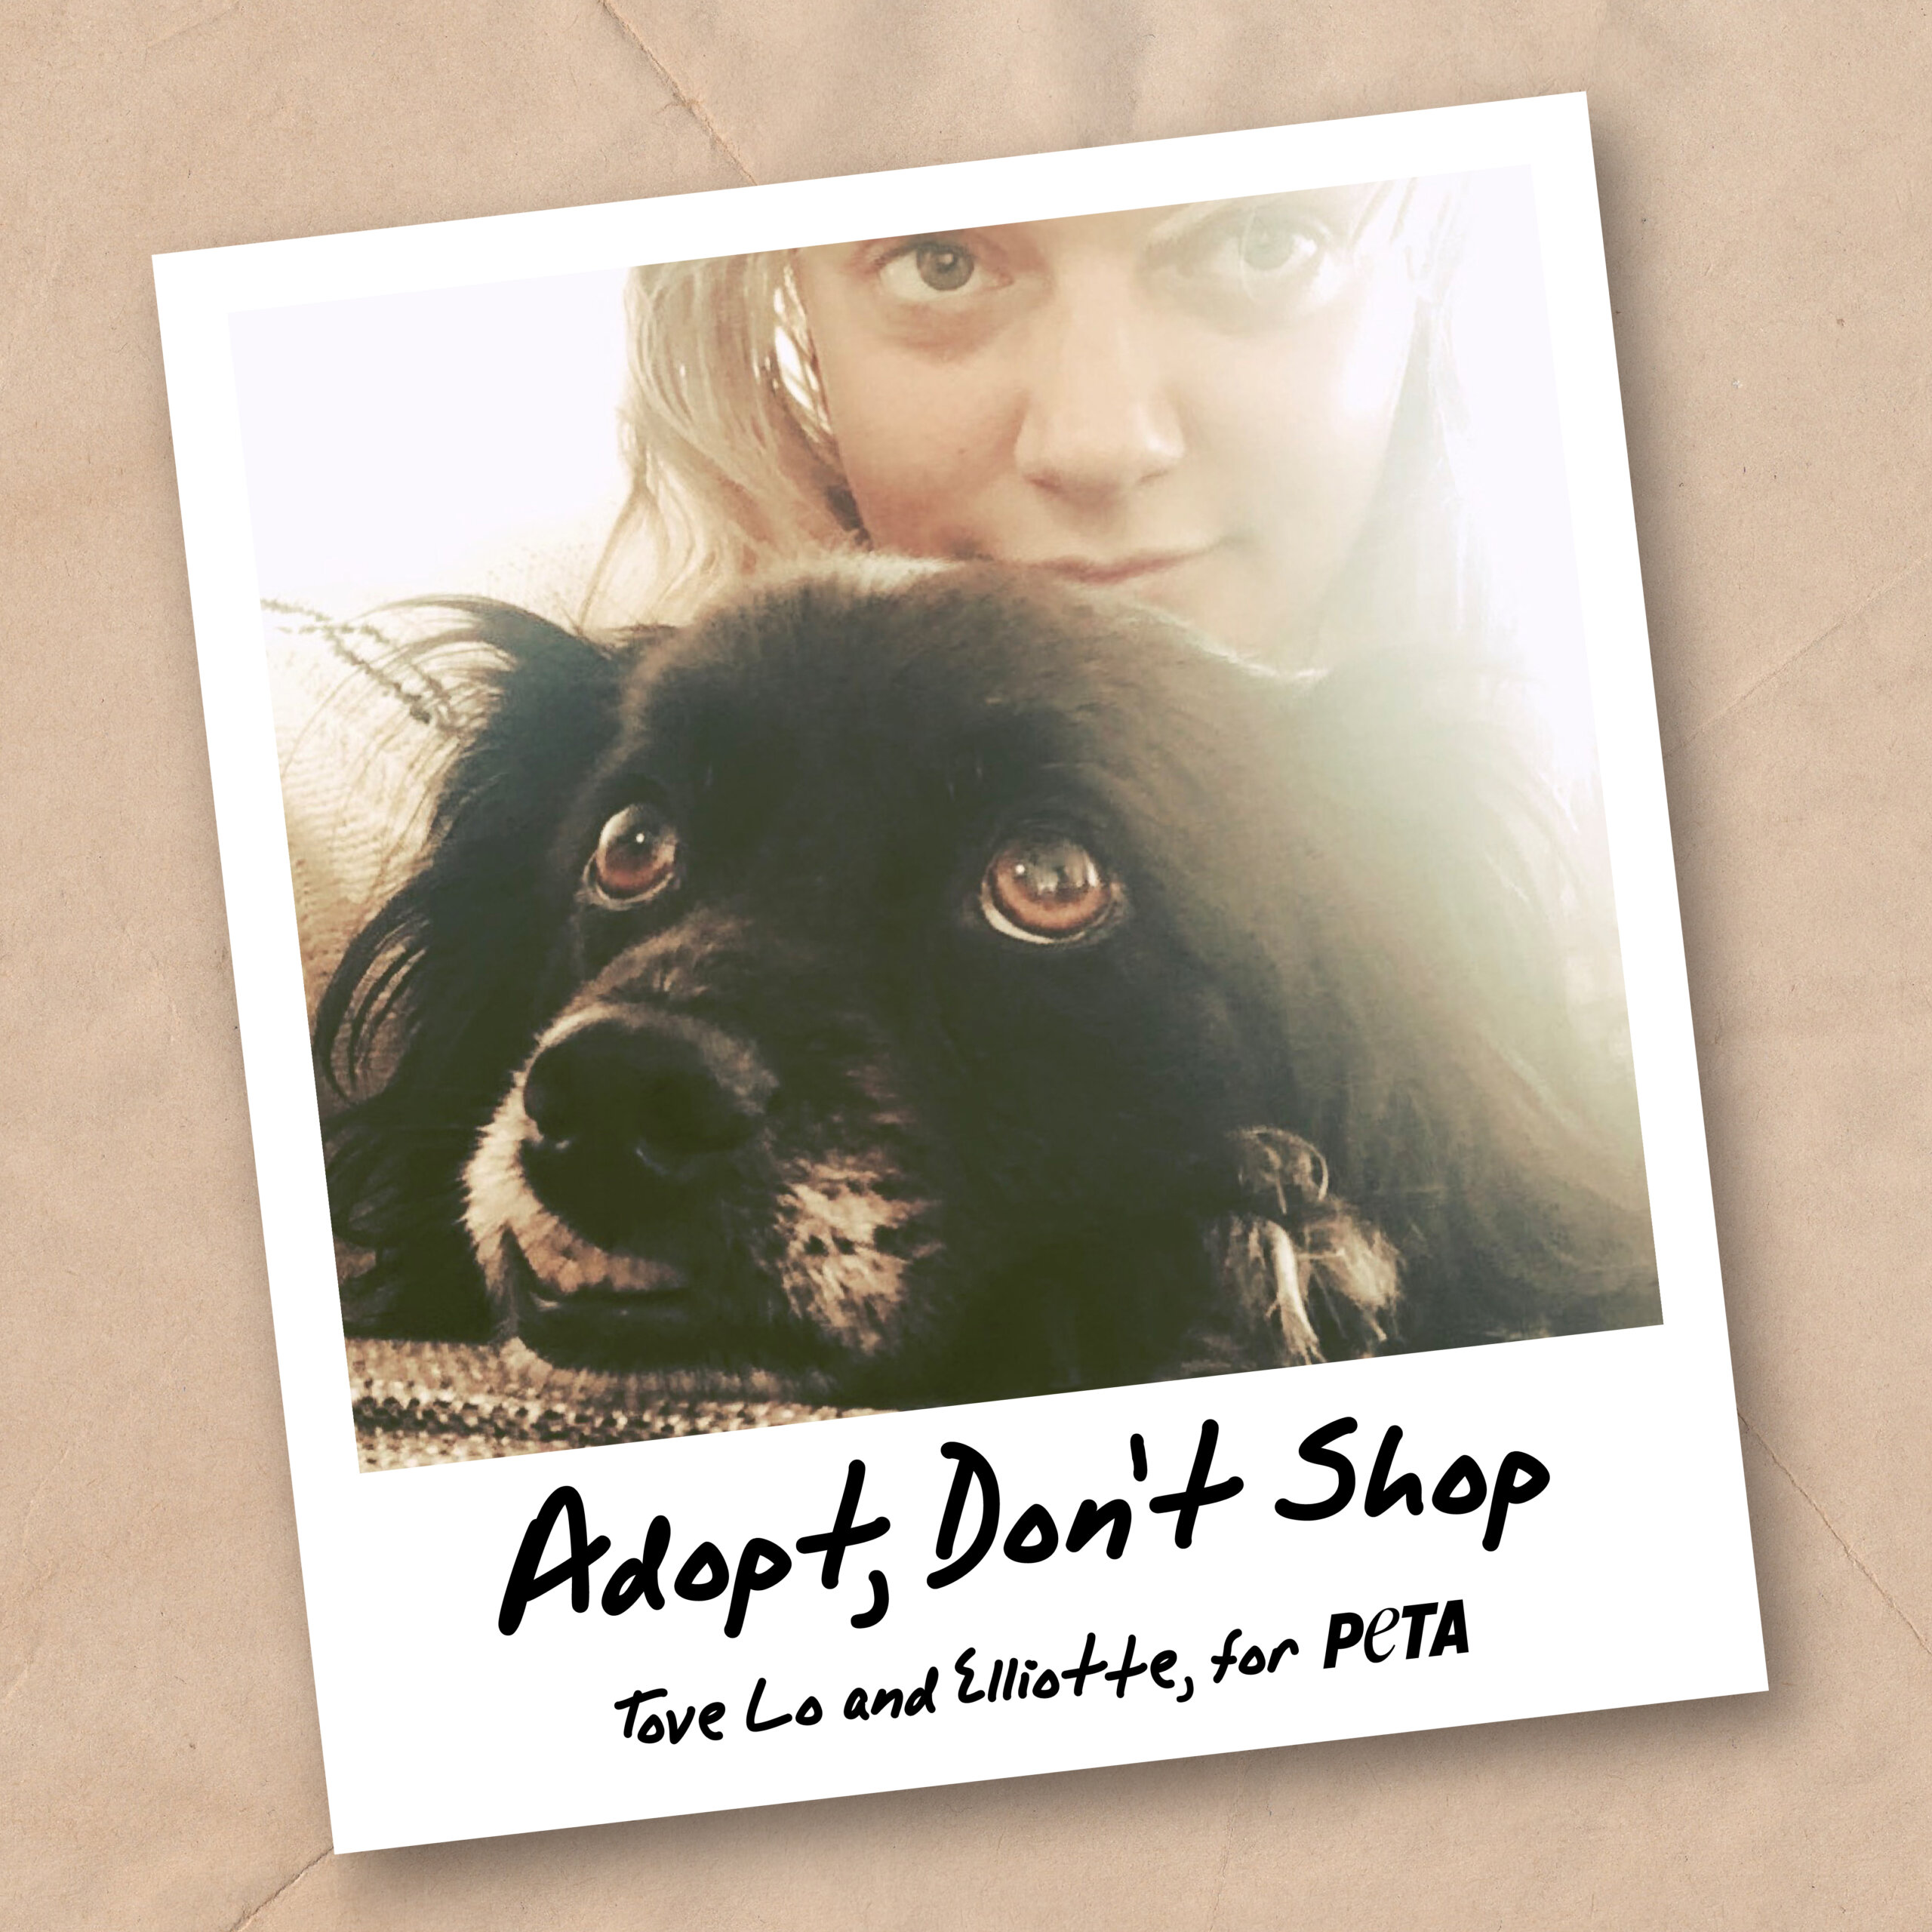 Tove Lo and Her Dog Star in ‘Adopt, Don’t Shop’ Campaign